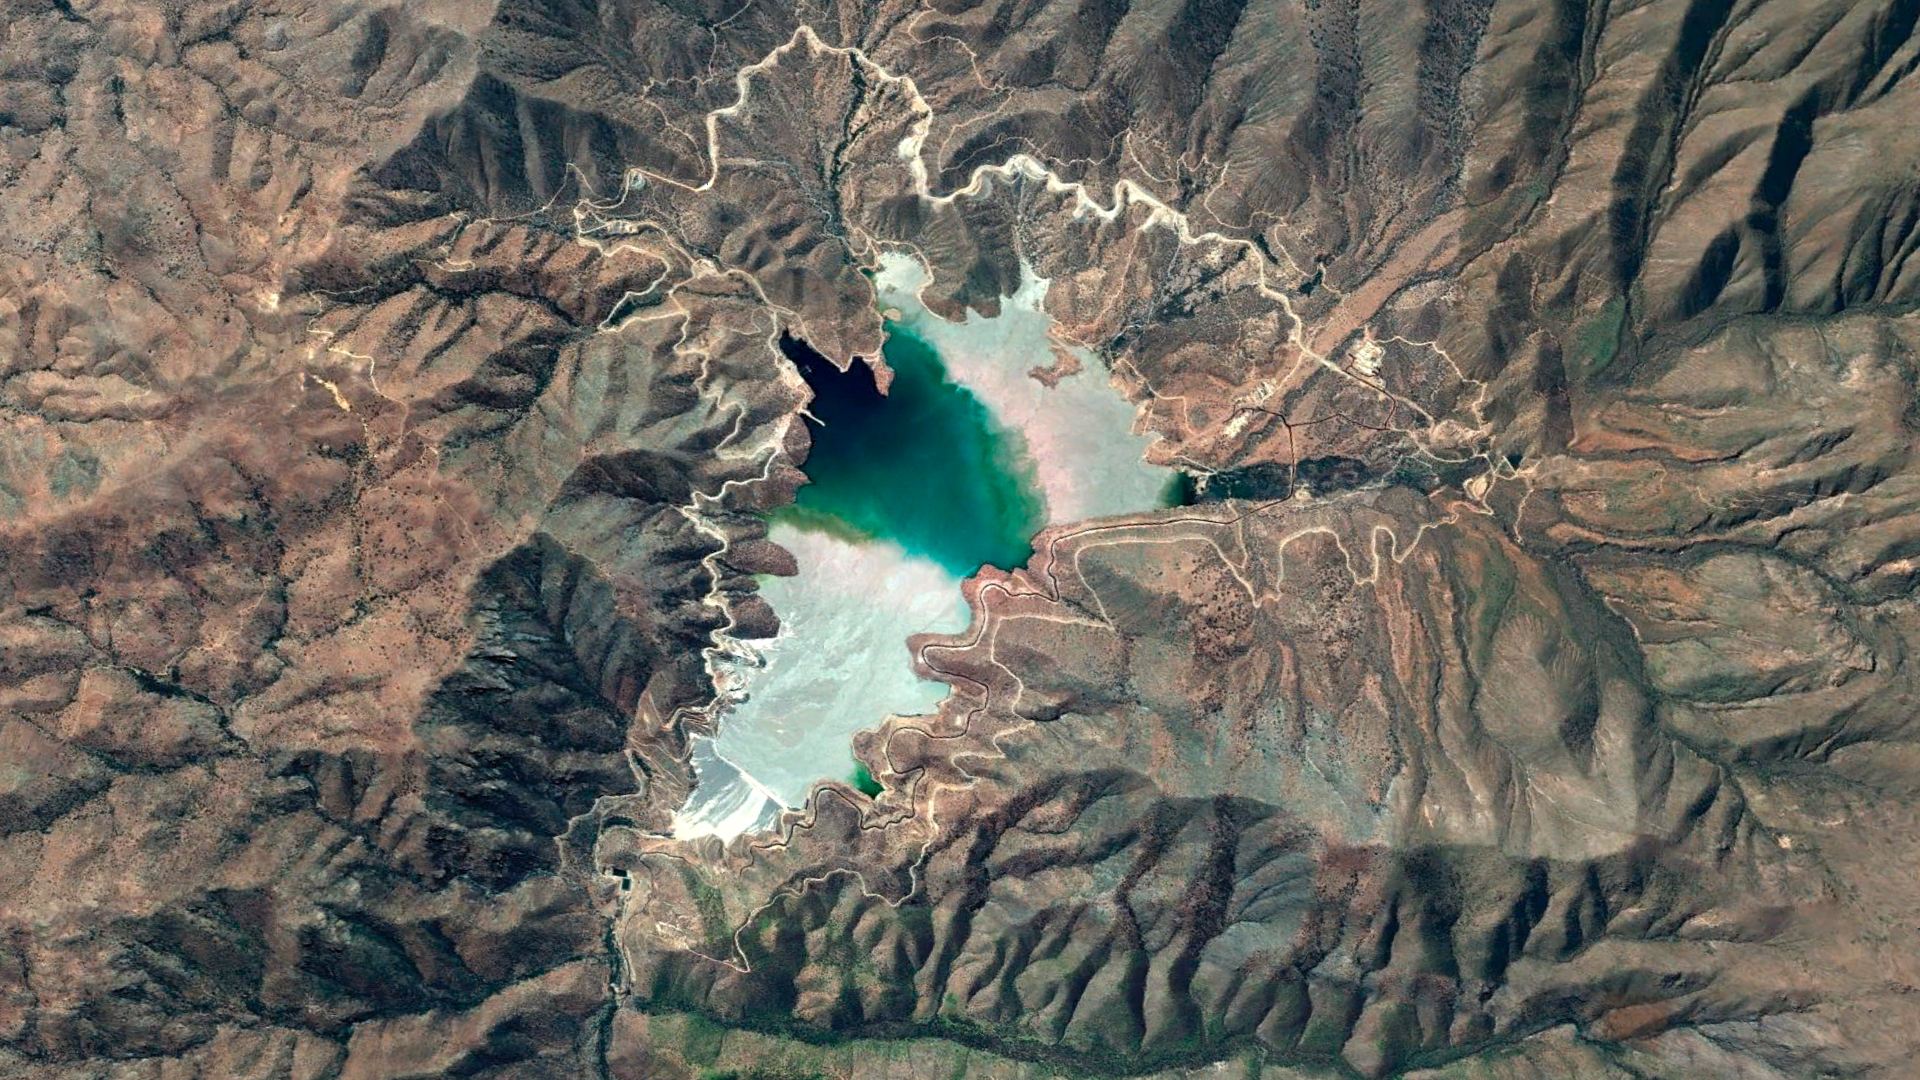 Google aerial view of El Mauro, Latin America's largest tailings and holding 2060 million tons of water and mining waste from Los Pelambres mine controlled by Antofagasta PLC 2020